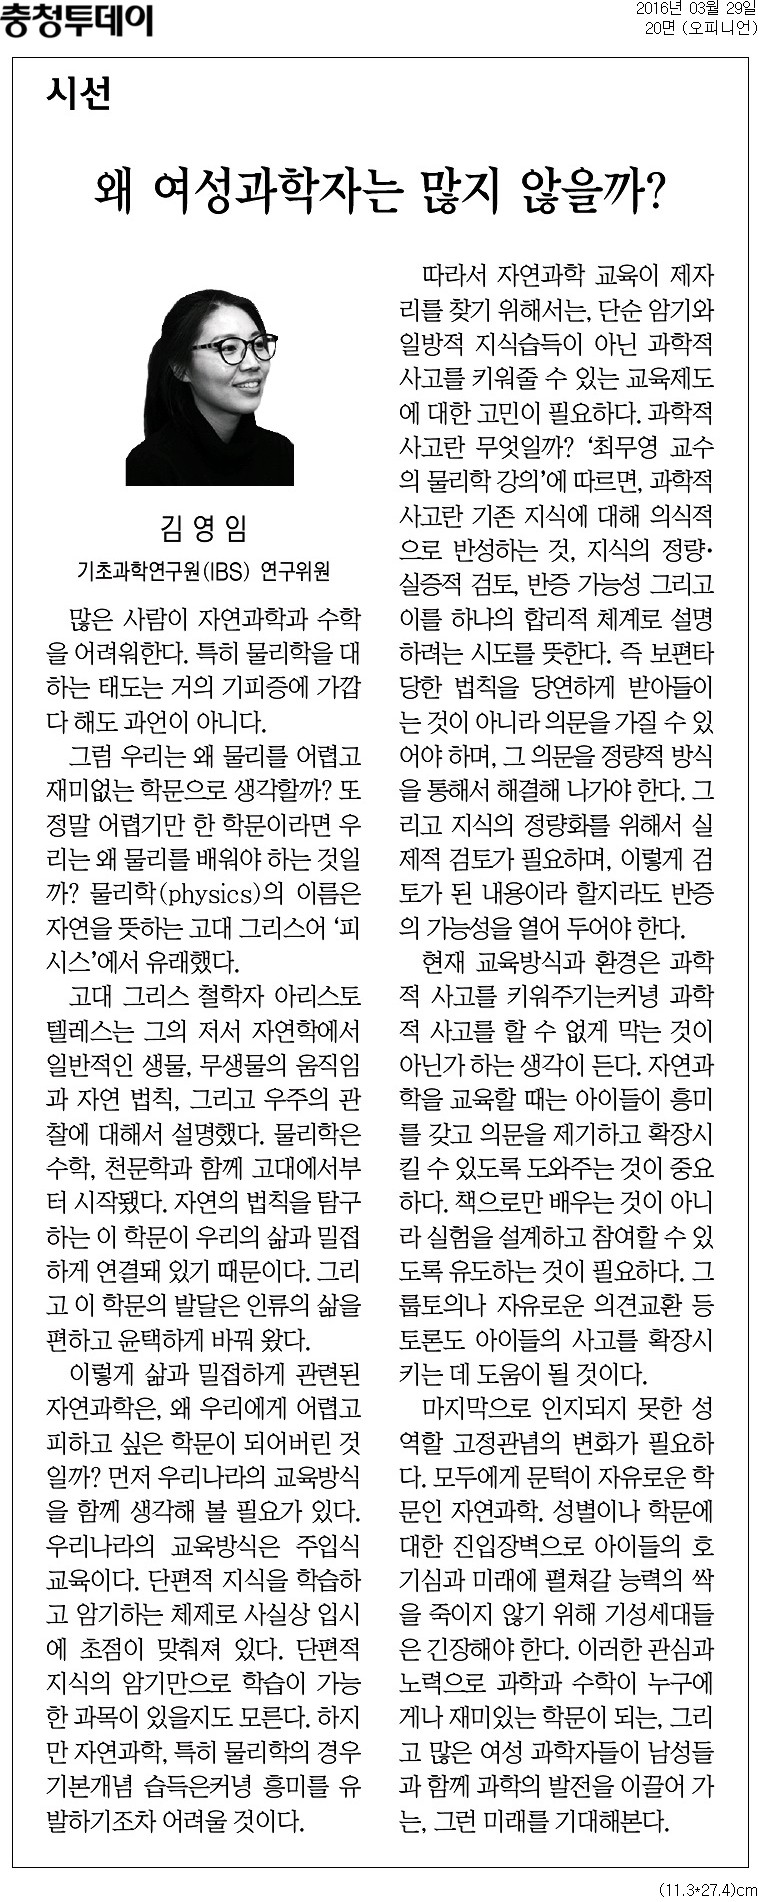 Newspaper Article on Physics Education - Chungcheong Today (March 29, 2016)